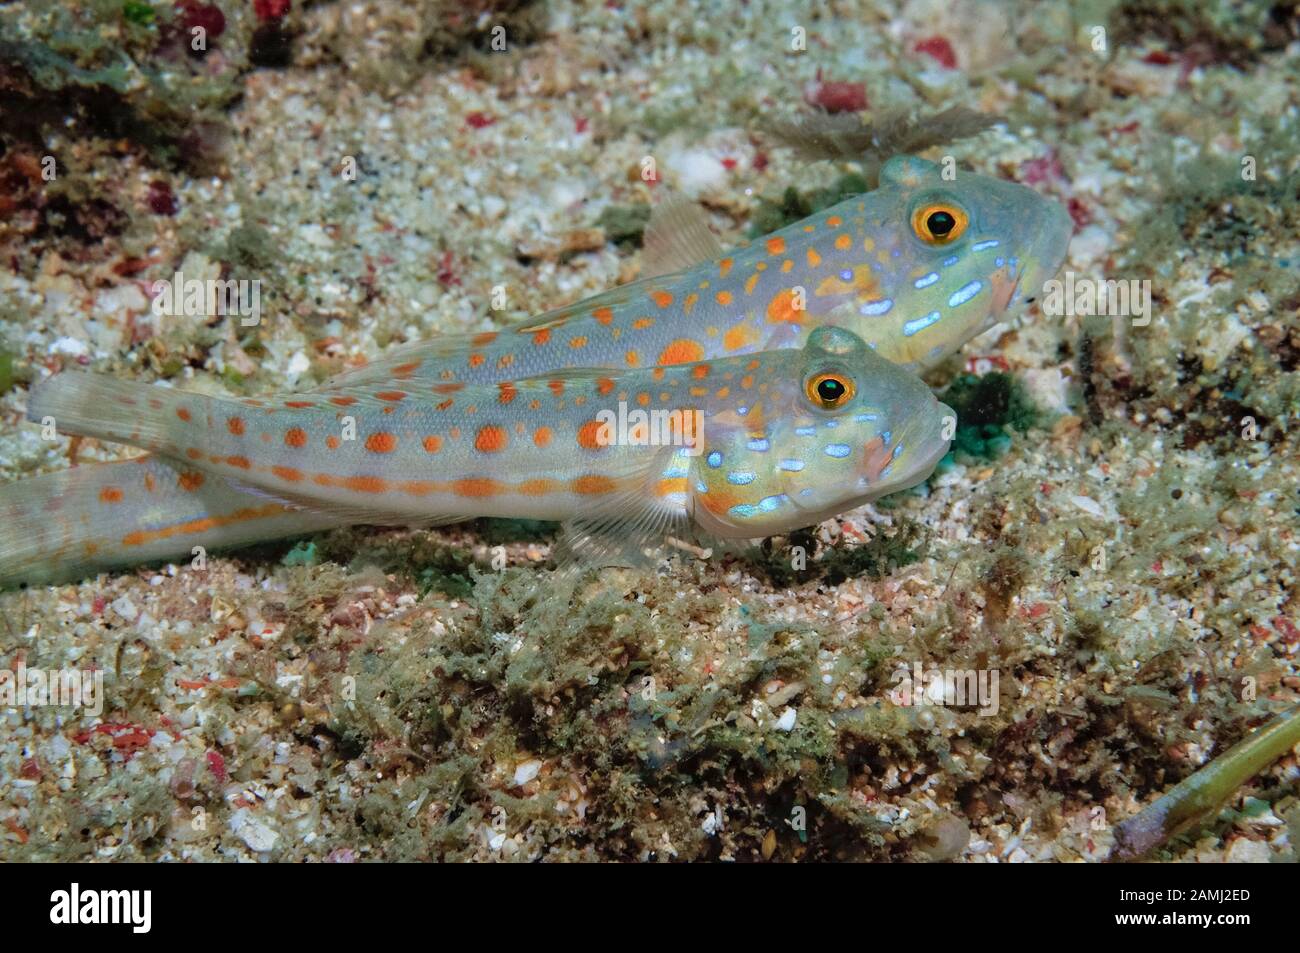 orange-spotted sleeper goby or orange-dashed goby, Valenciennea puellaris, Sekotong, Lombok, Indonesia, Bali Sea, Indian Ocean Stock Photo